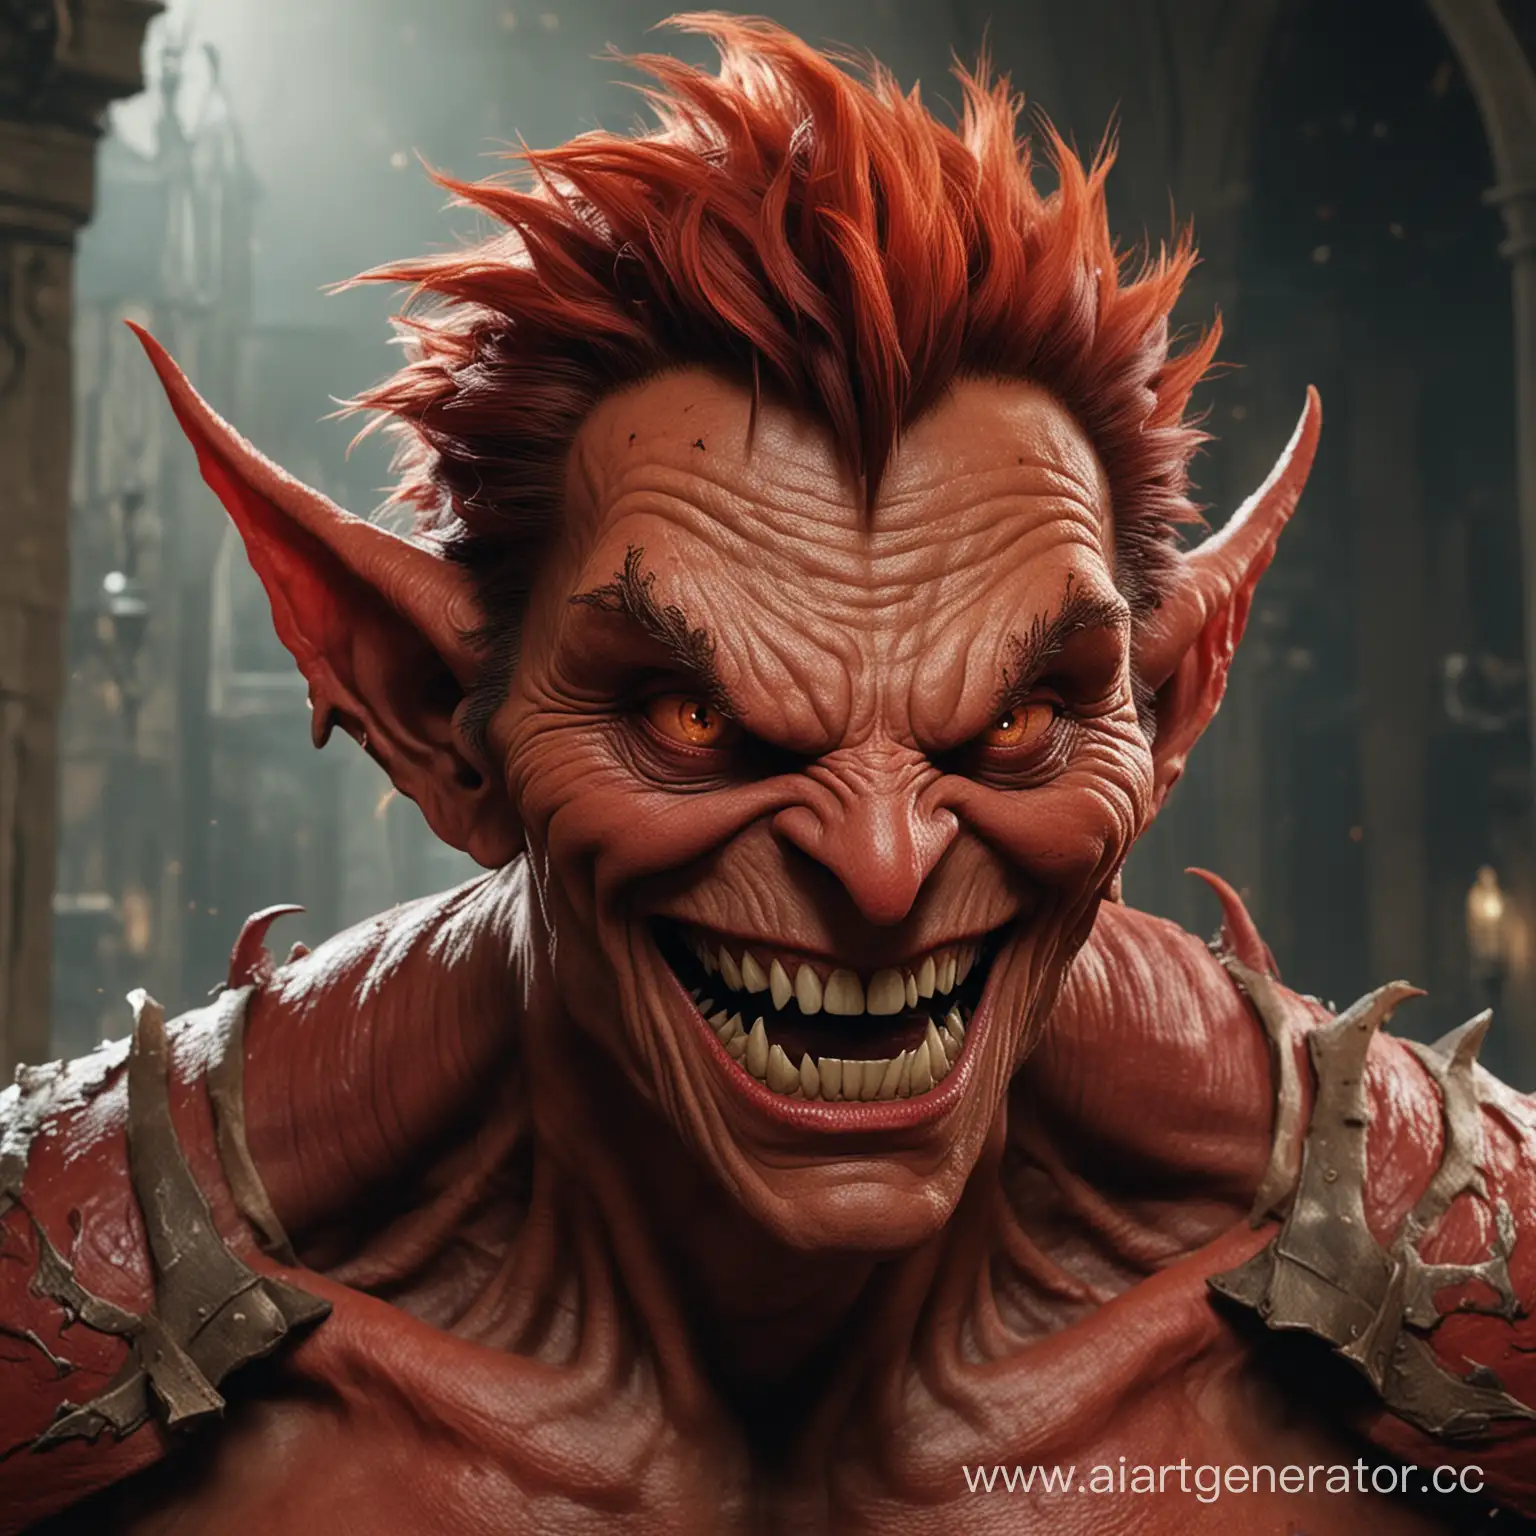 Malicious-Grinning-Red-Goblin-Head